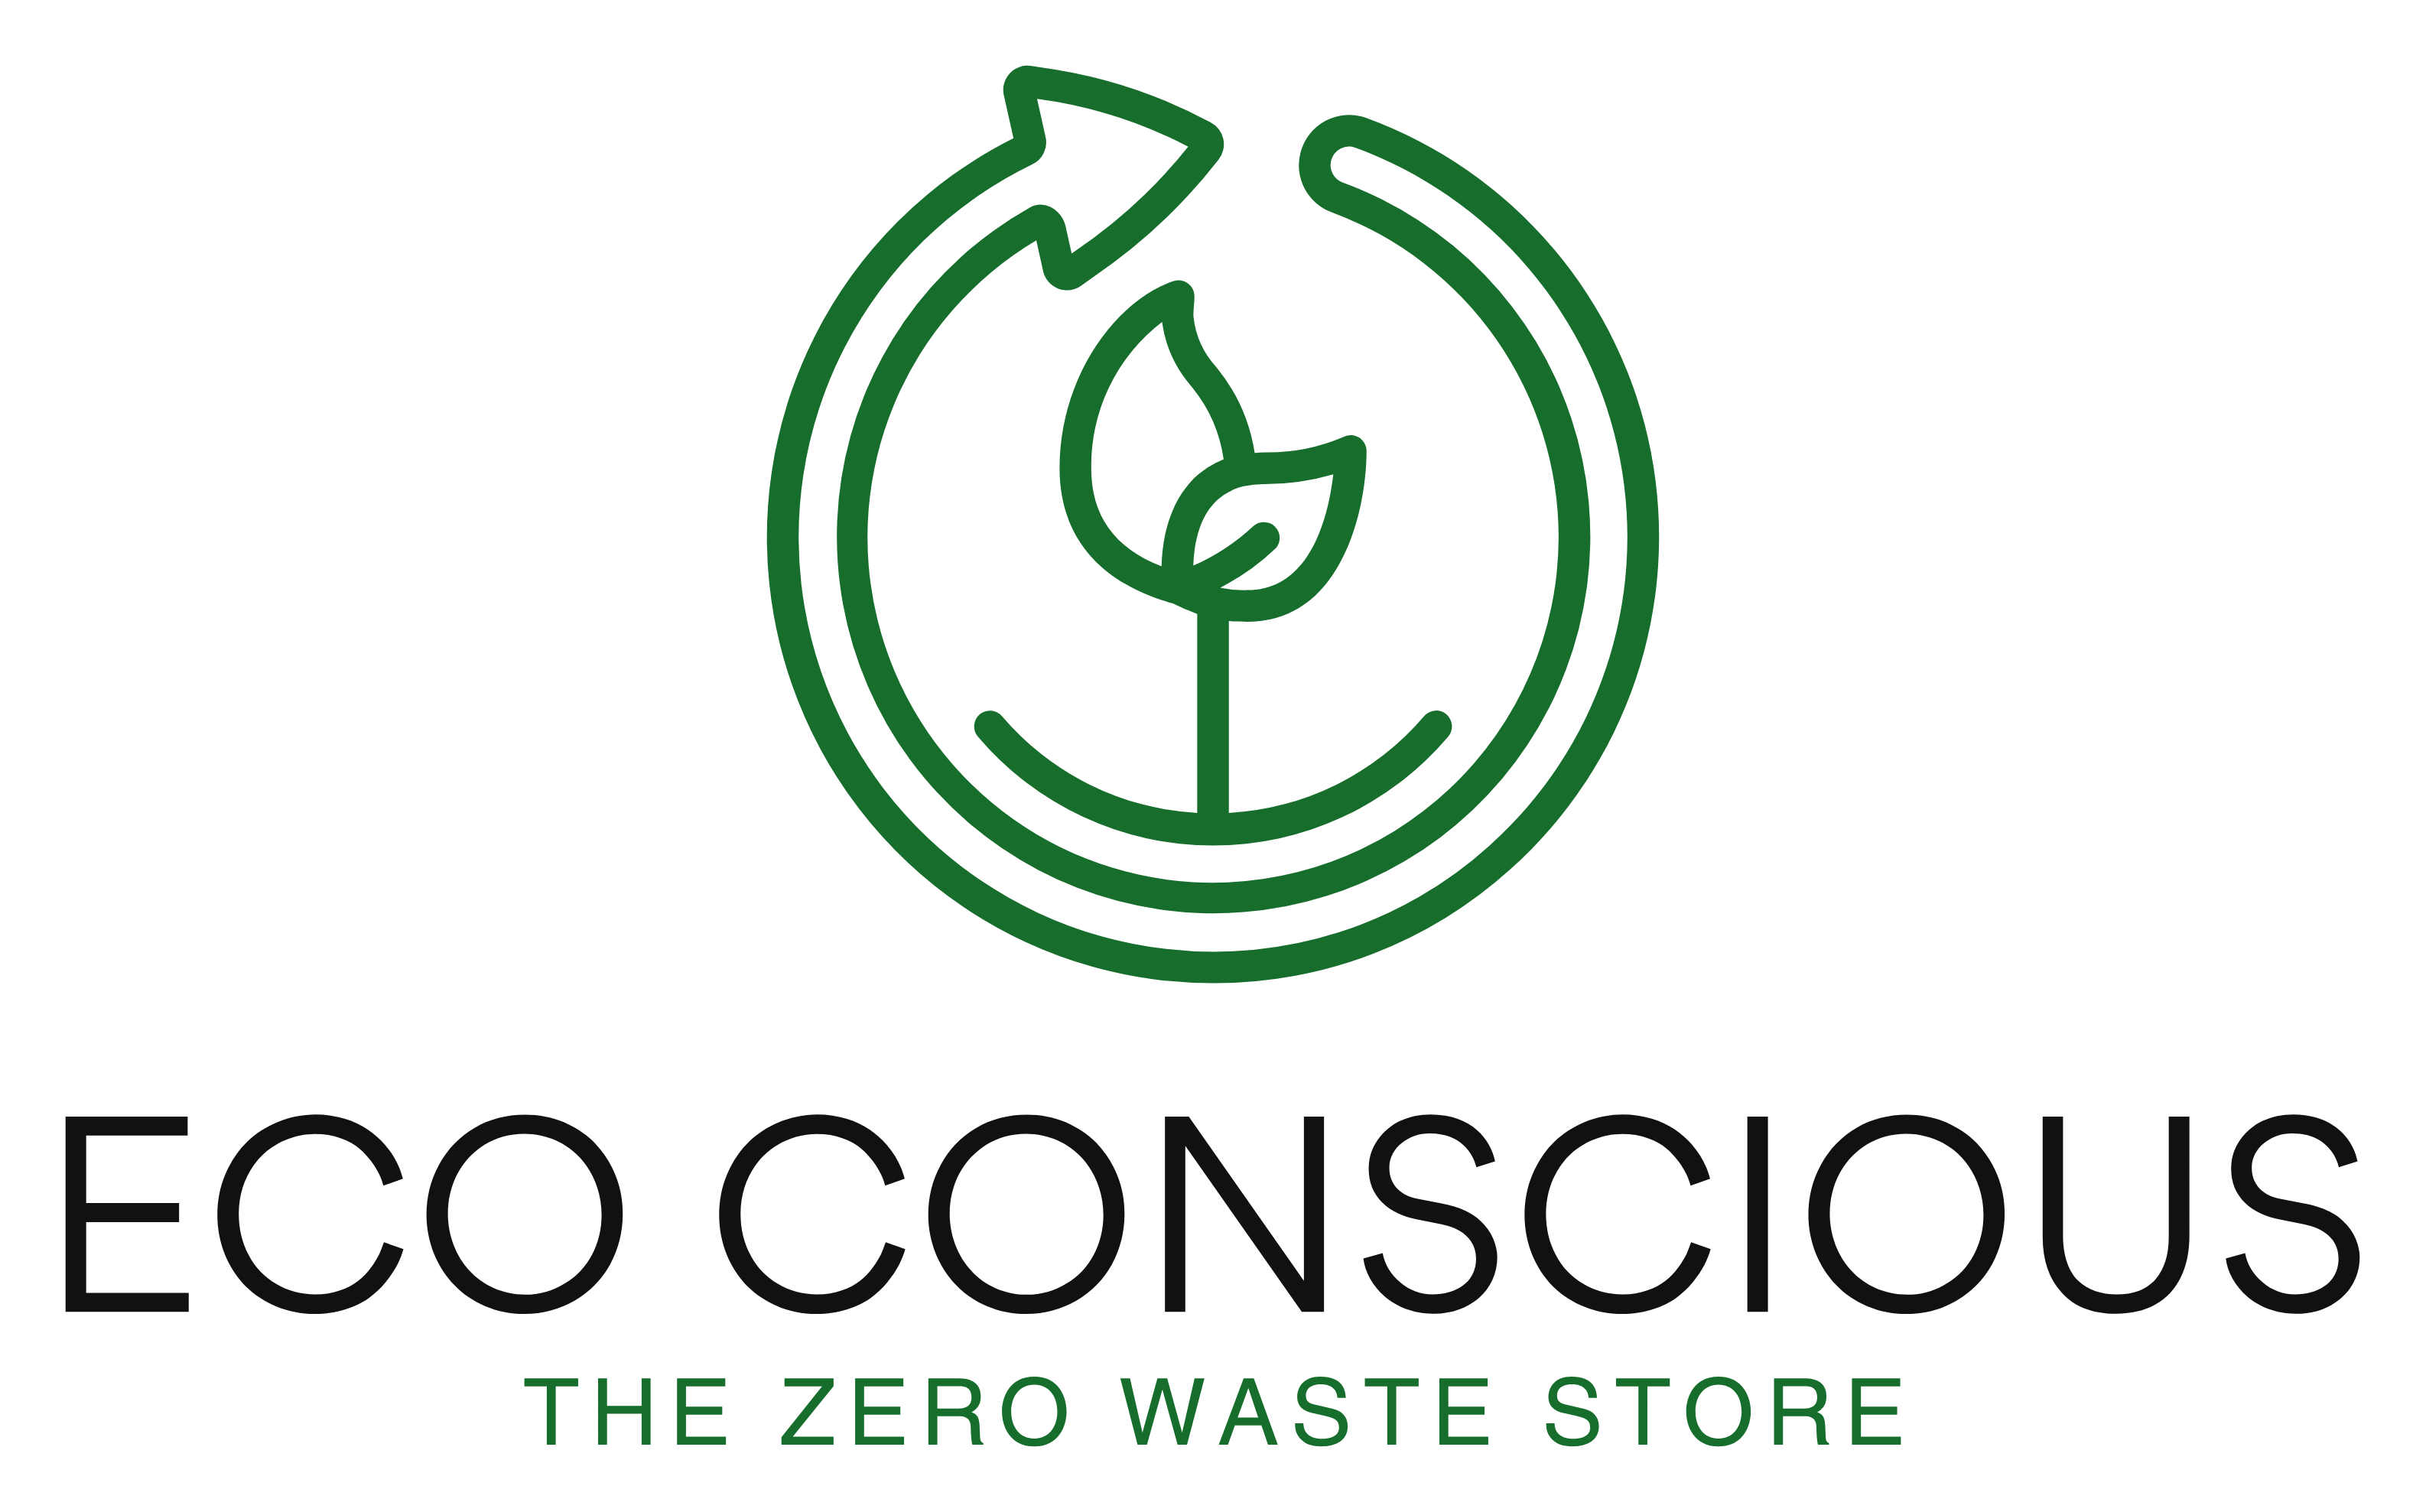 https://ecoconscious.ca/images/icons/logo.png